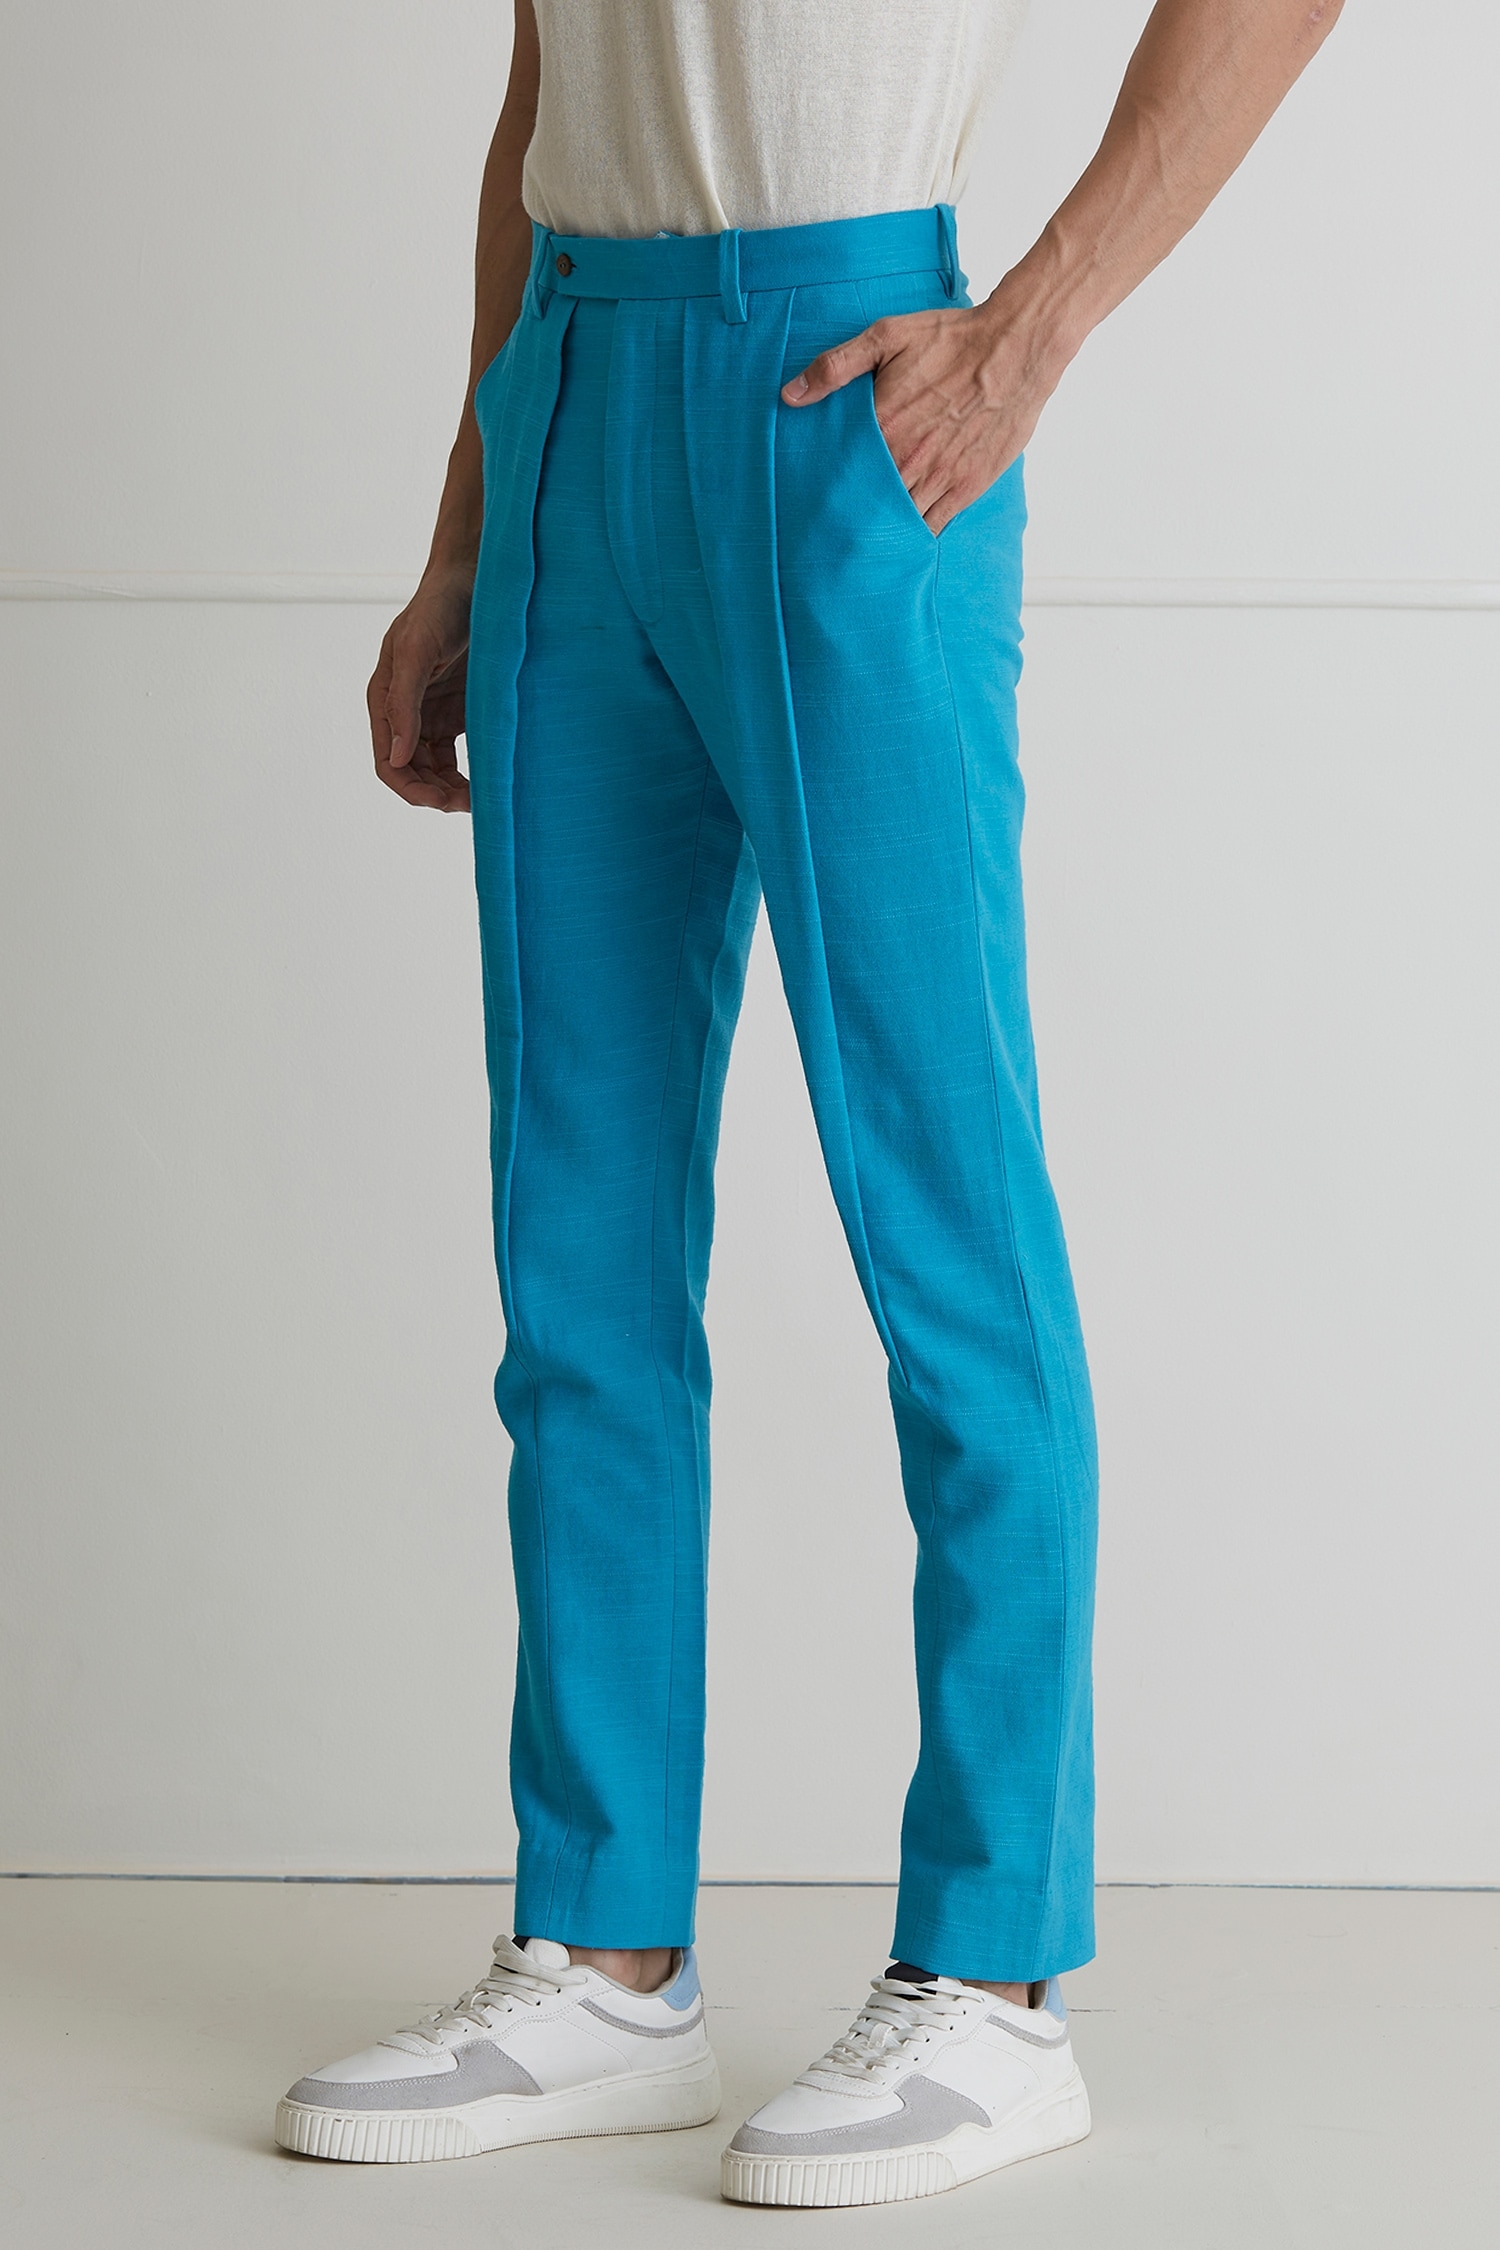 Joe  Jo Turquoise Trouser Pants  Men  Best Price and Reviews  Zulily